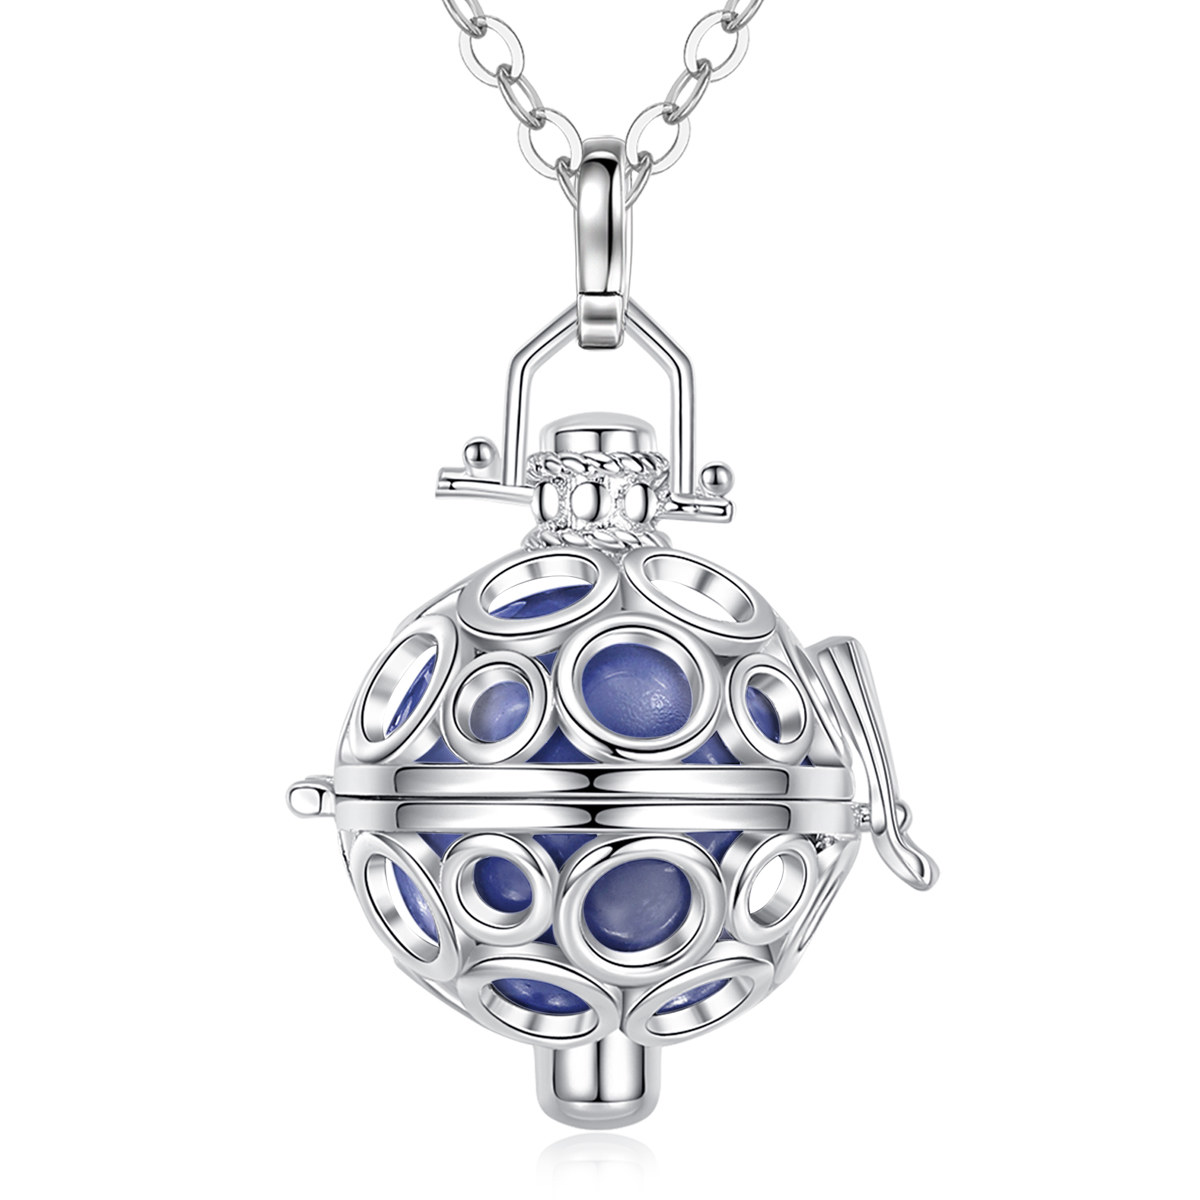 Merryshine Jewelry Company S925 Sterling Silver Harmony Ball Mexican Chimes Necklace